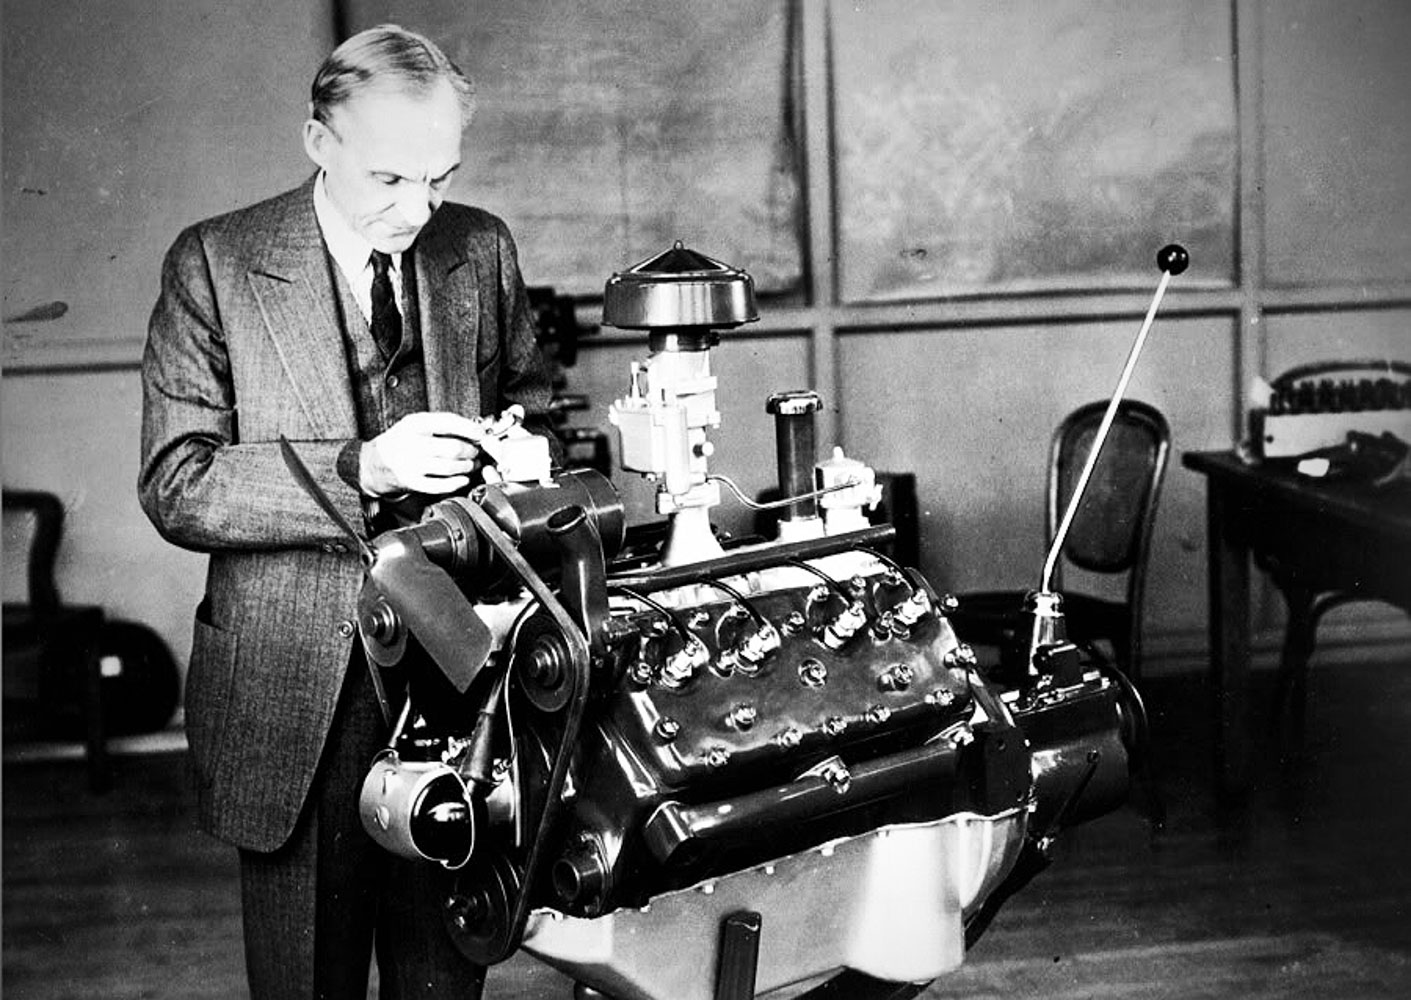 The history of Ford engines